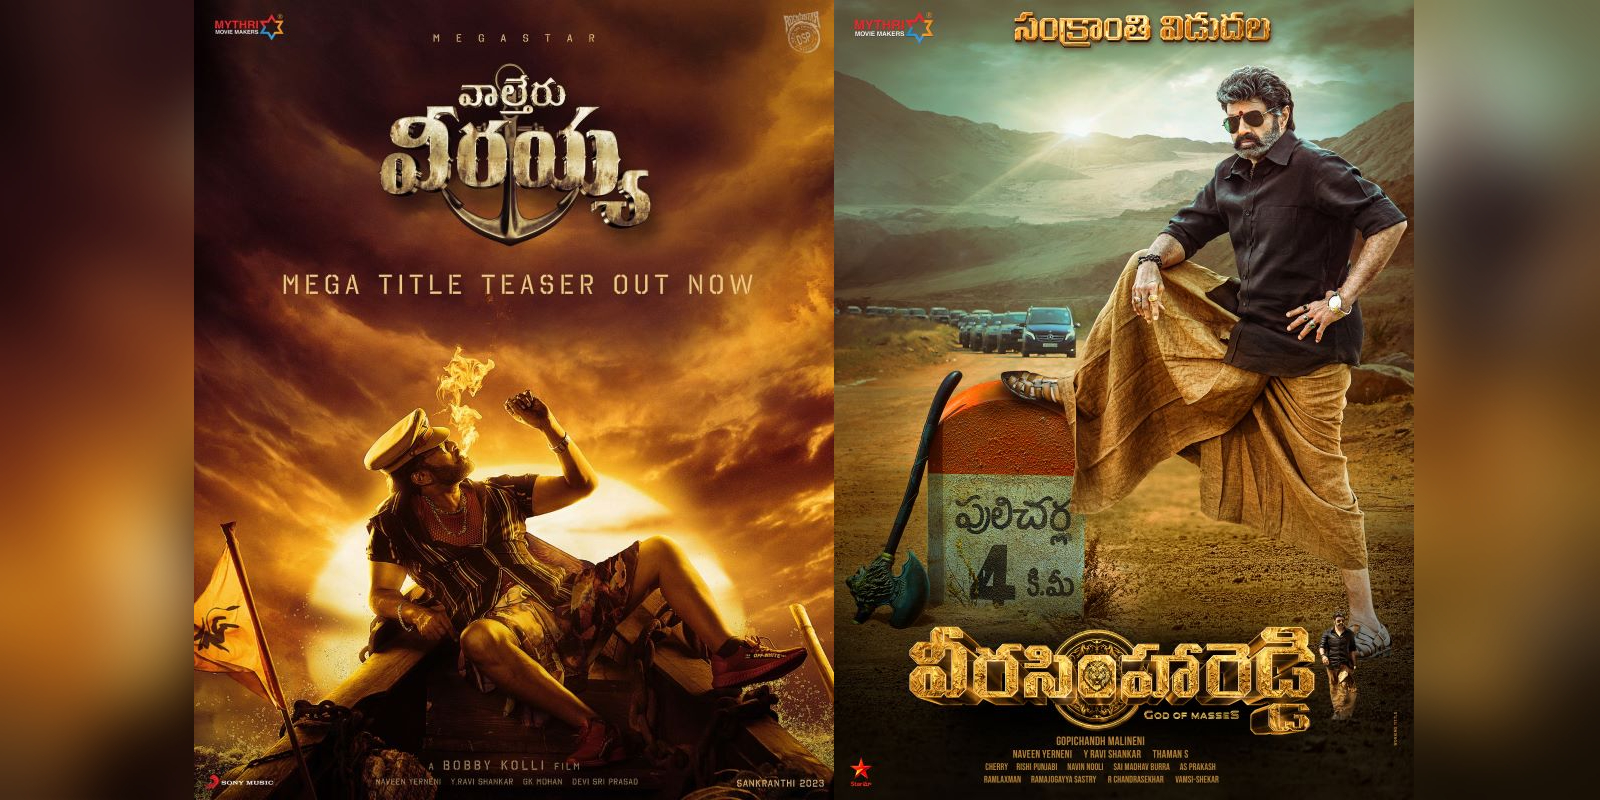 Telugu films releasing for Sankranti 2023 - The South First